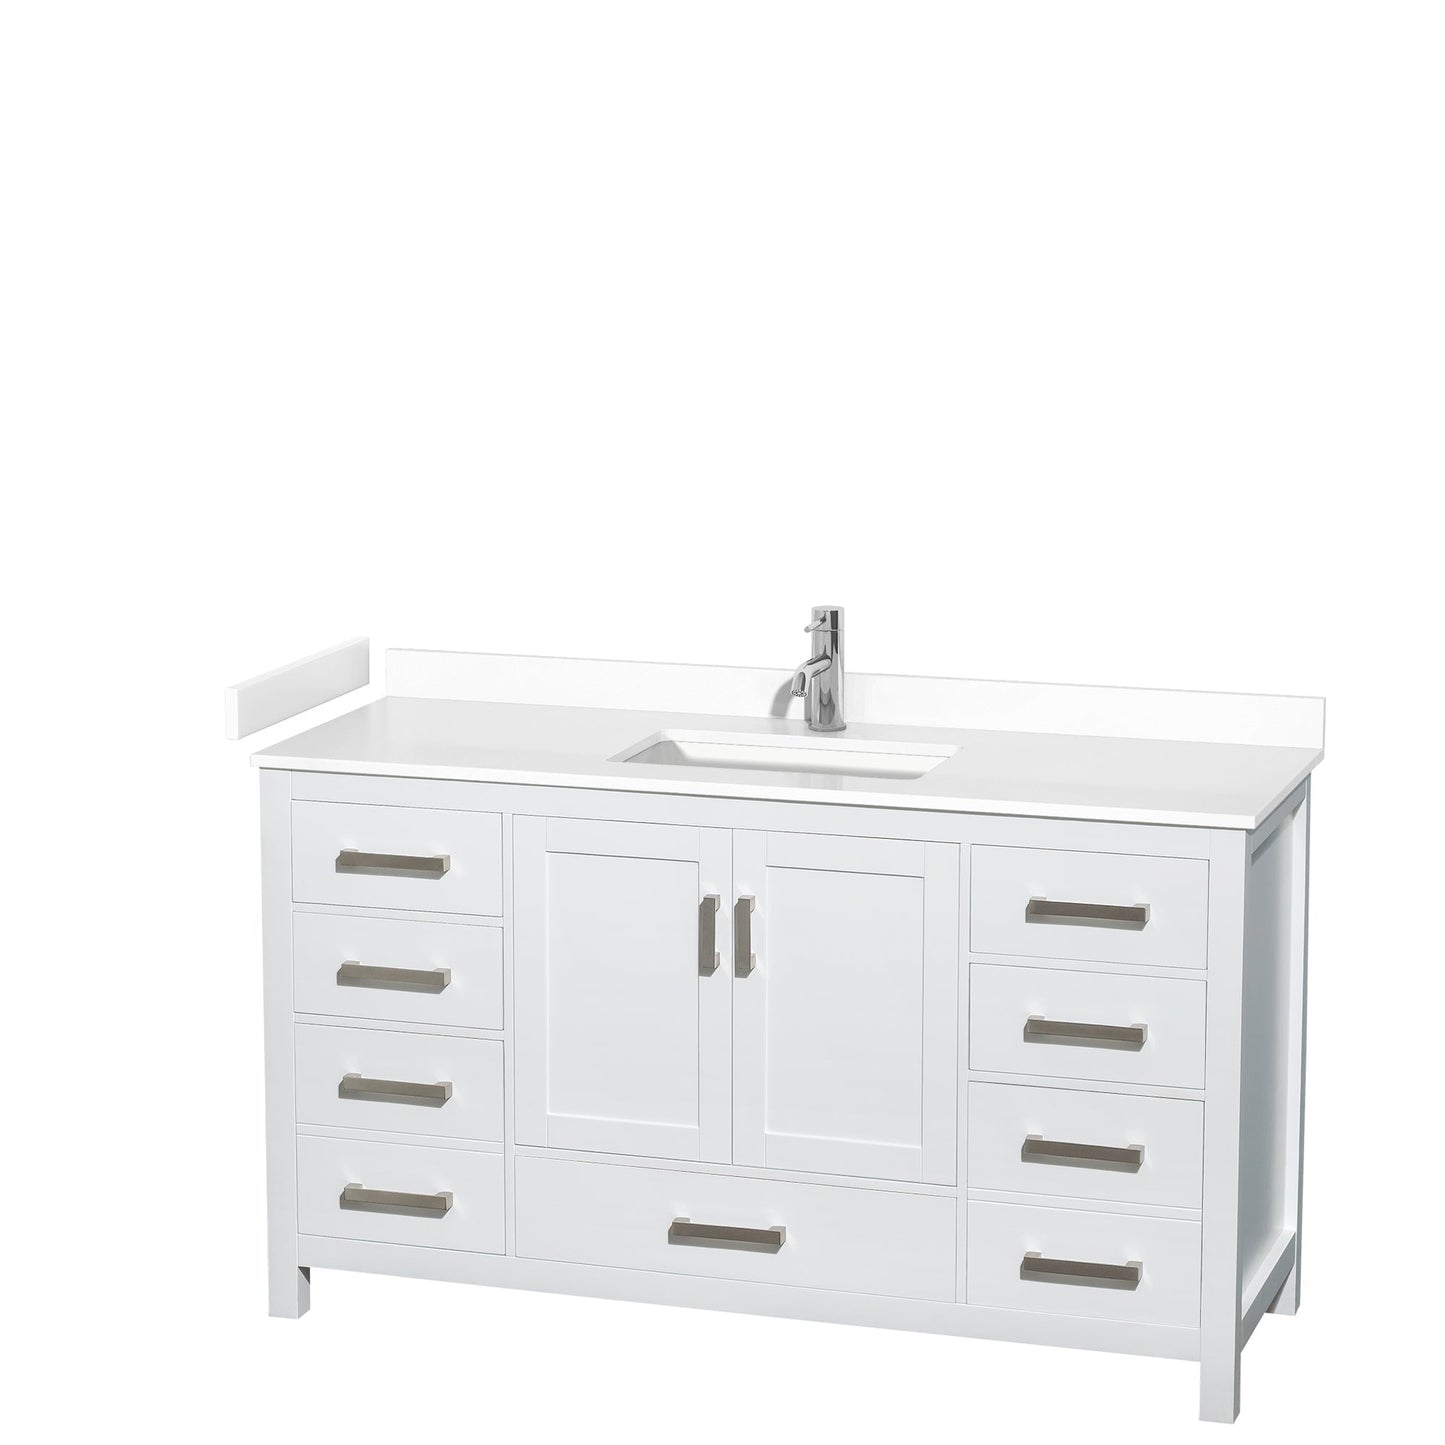 Wyndham Collection Sheffield 60" Single Bathroom Vanity in White, White Cultured Marble Countertop, Undermount Square Sink, No Mirror